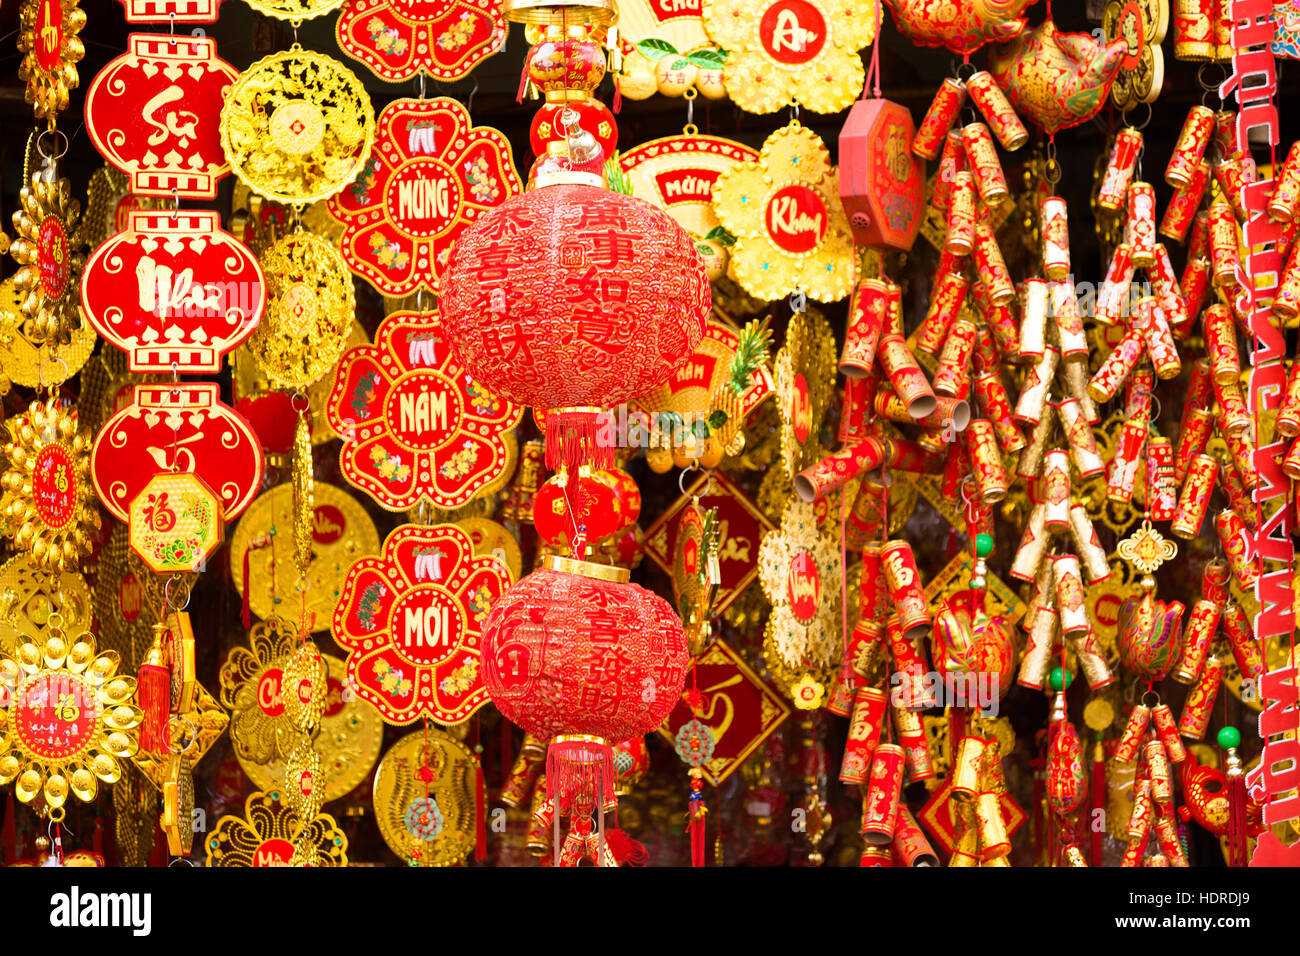 Red Chinese New Year decorations to celebrate the lunar new year of Tet in the Cholon area of Ho Chi Minh City, Vietnam. Stock Photo